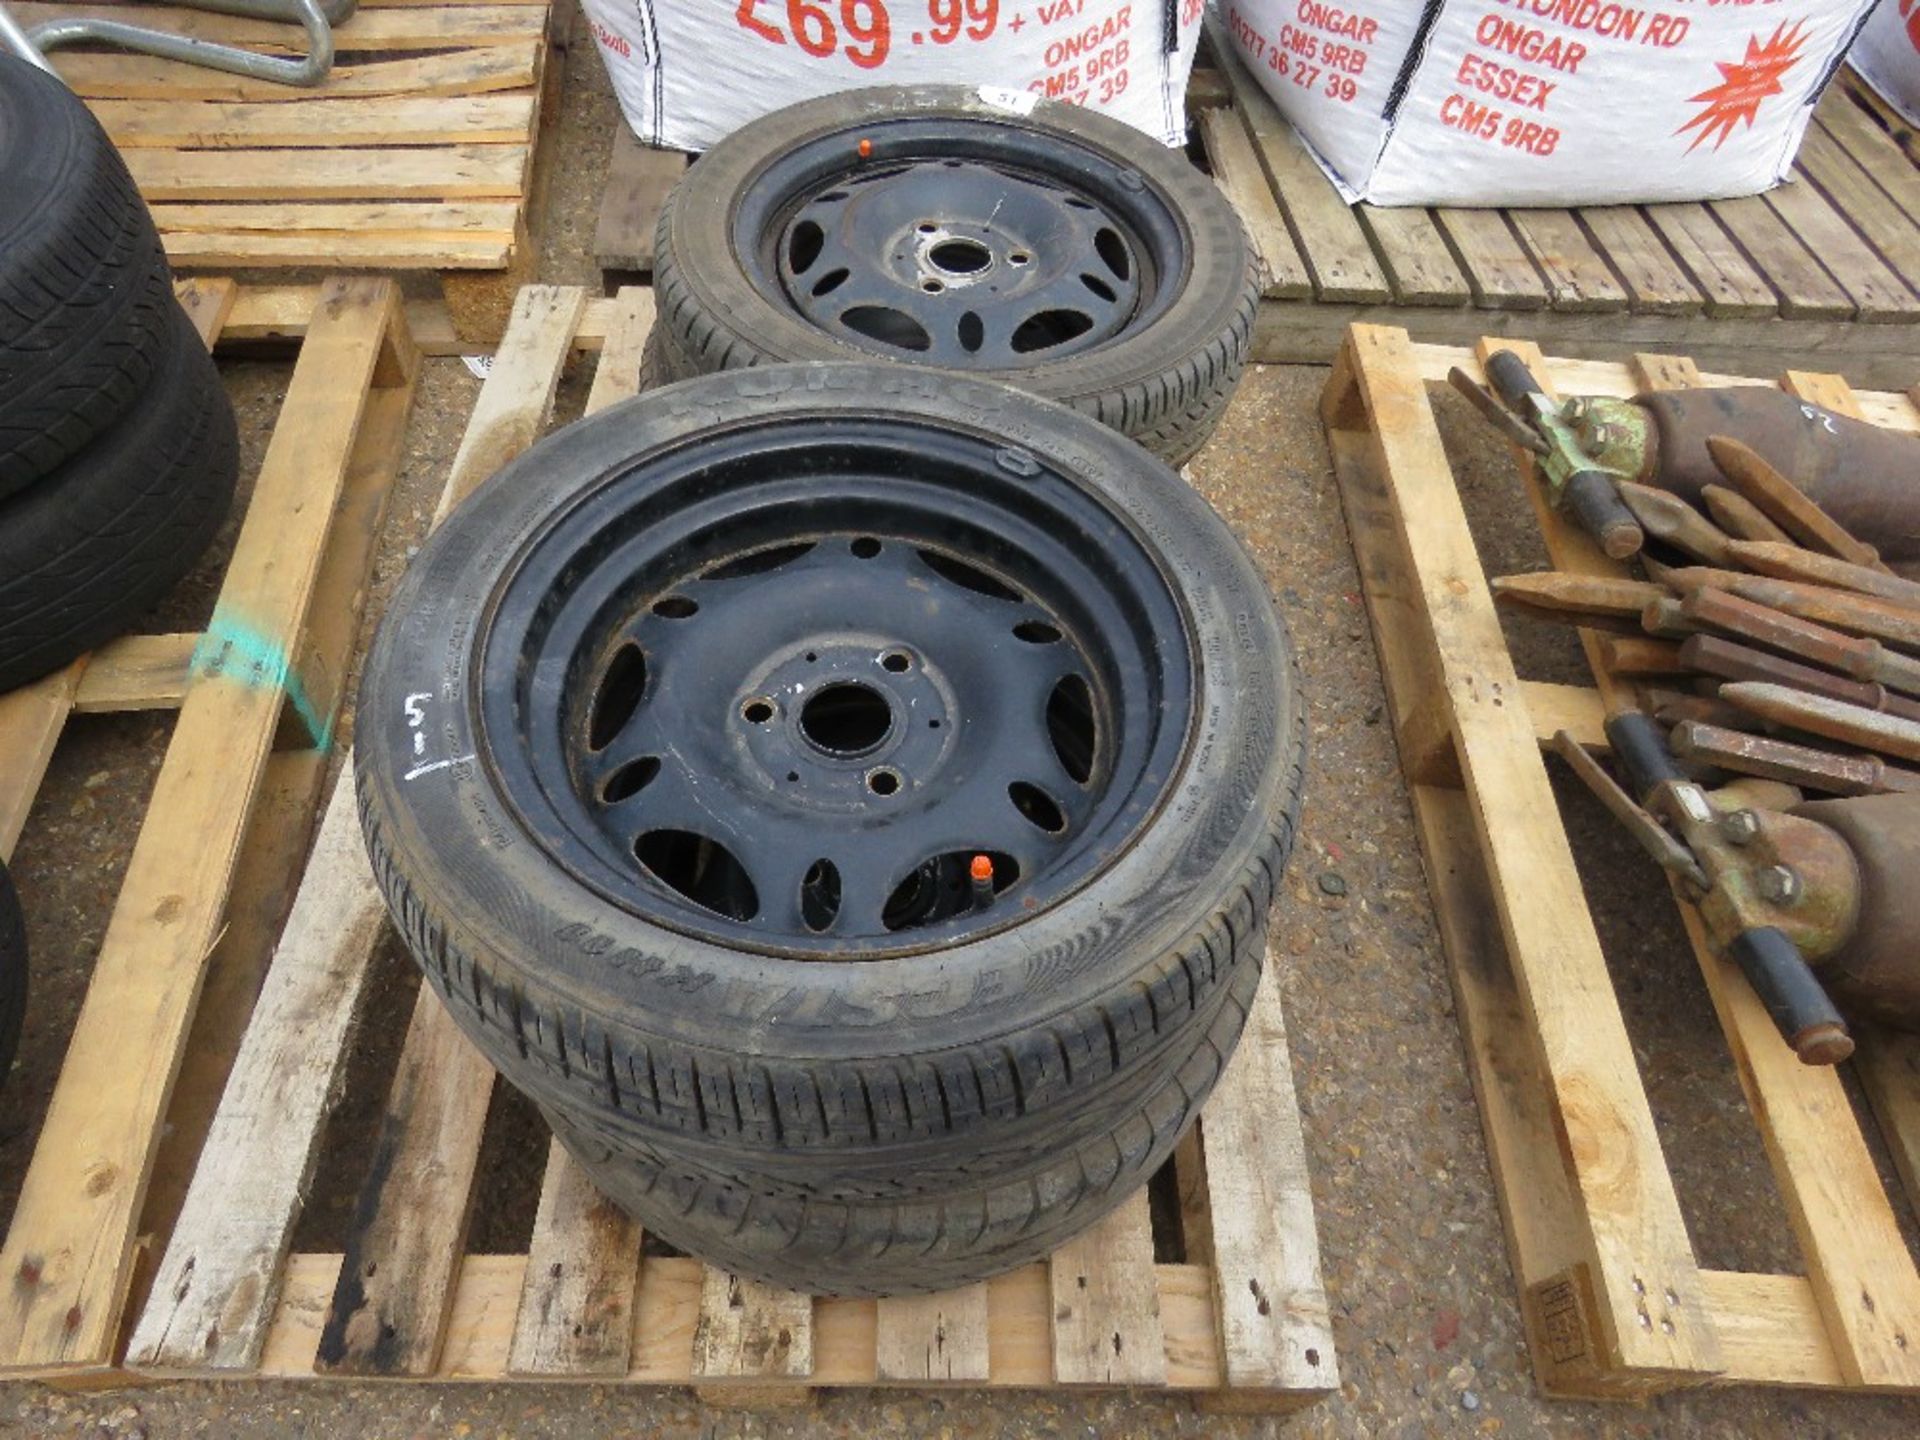 4 X WHEELS AND TYRES 15" SIZE. SOURCED FROM DEPOT CLOSURE. - Image 2 of 3